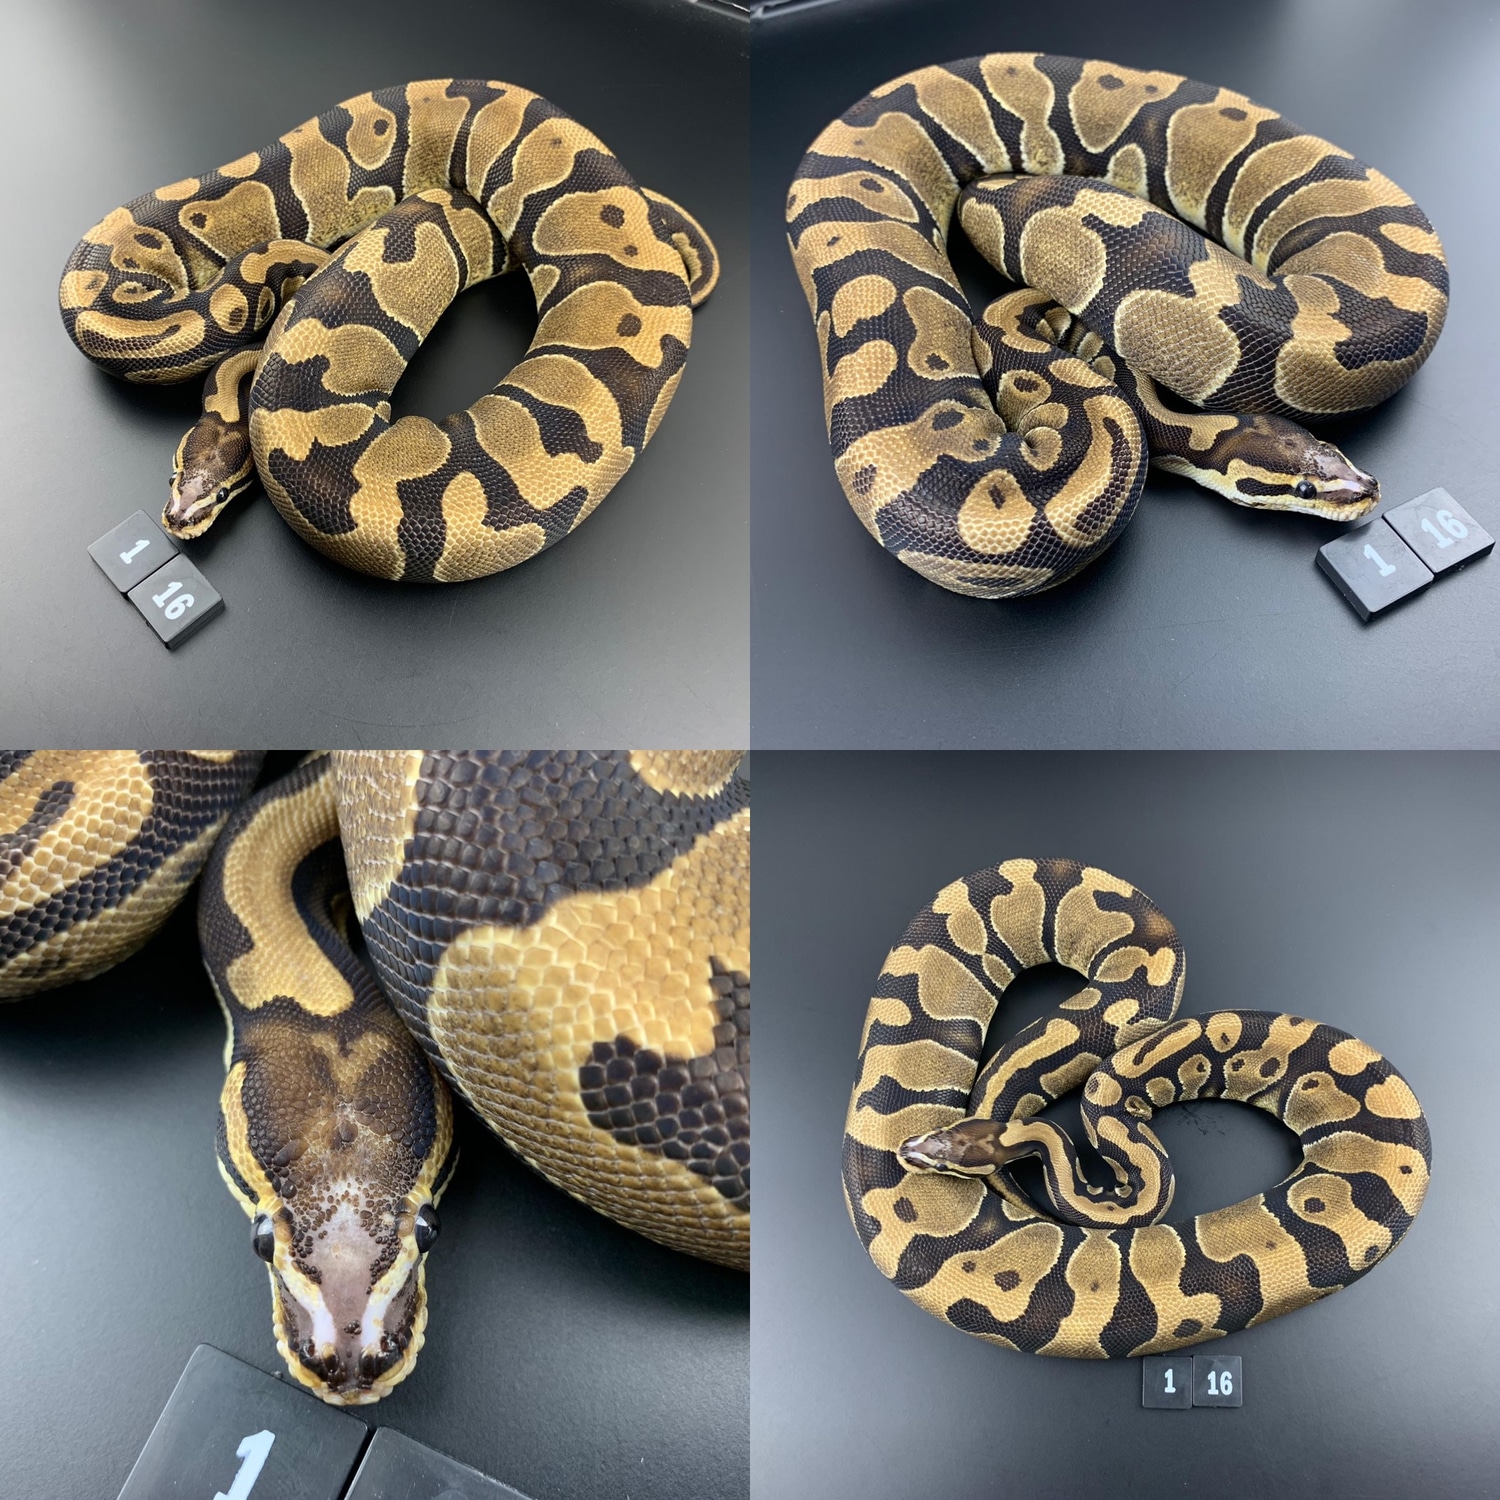 Microscale With Slight Zip Belly Ball Python by D & Jo's Pythons